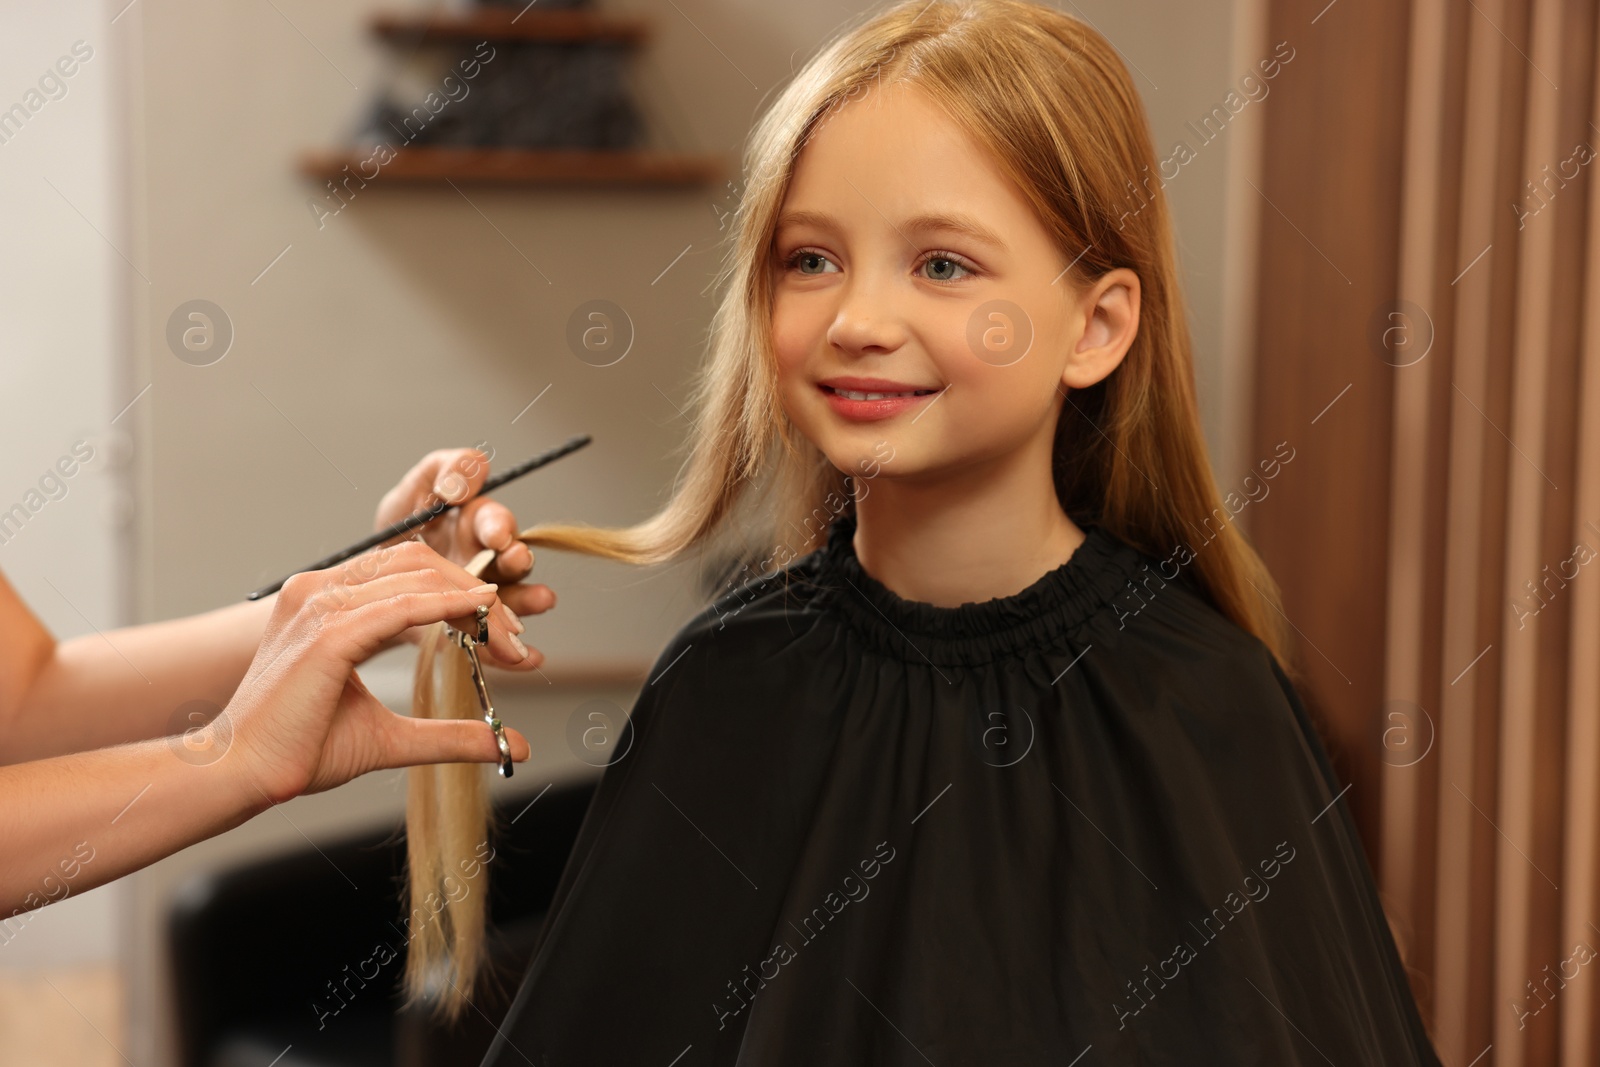 Photo of Professional hairdresser cutting girl's hair in beauty salon